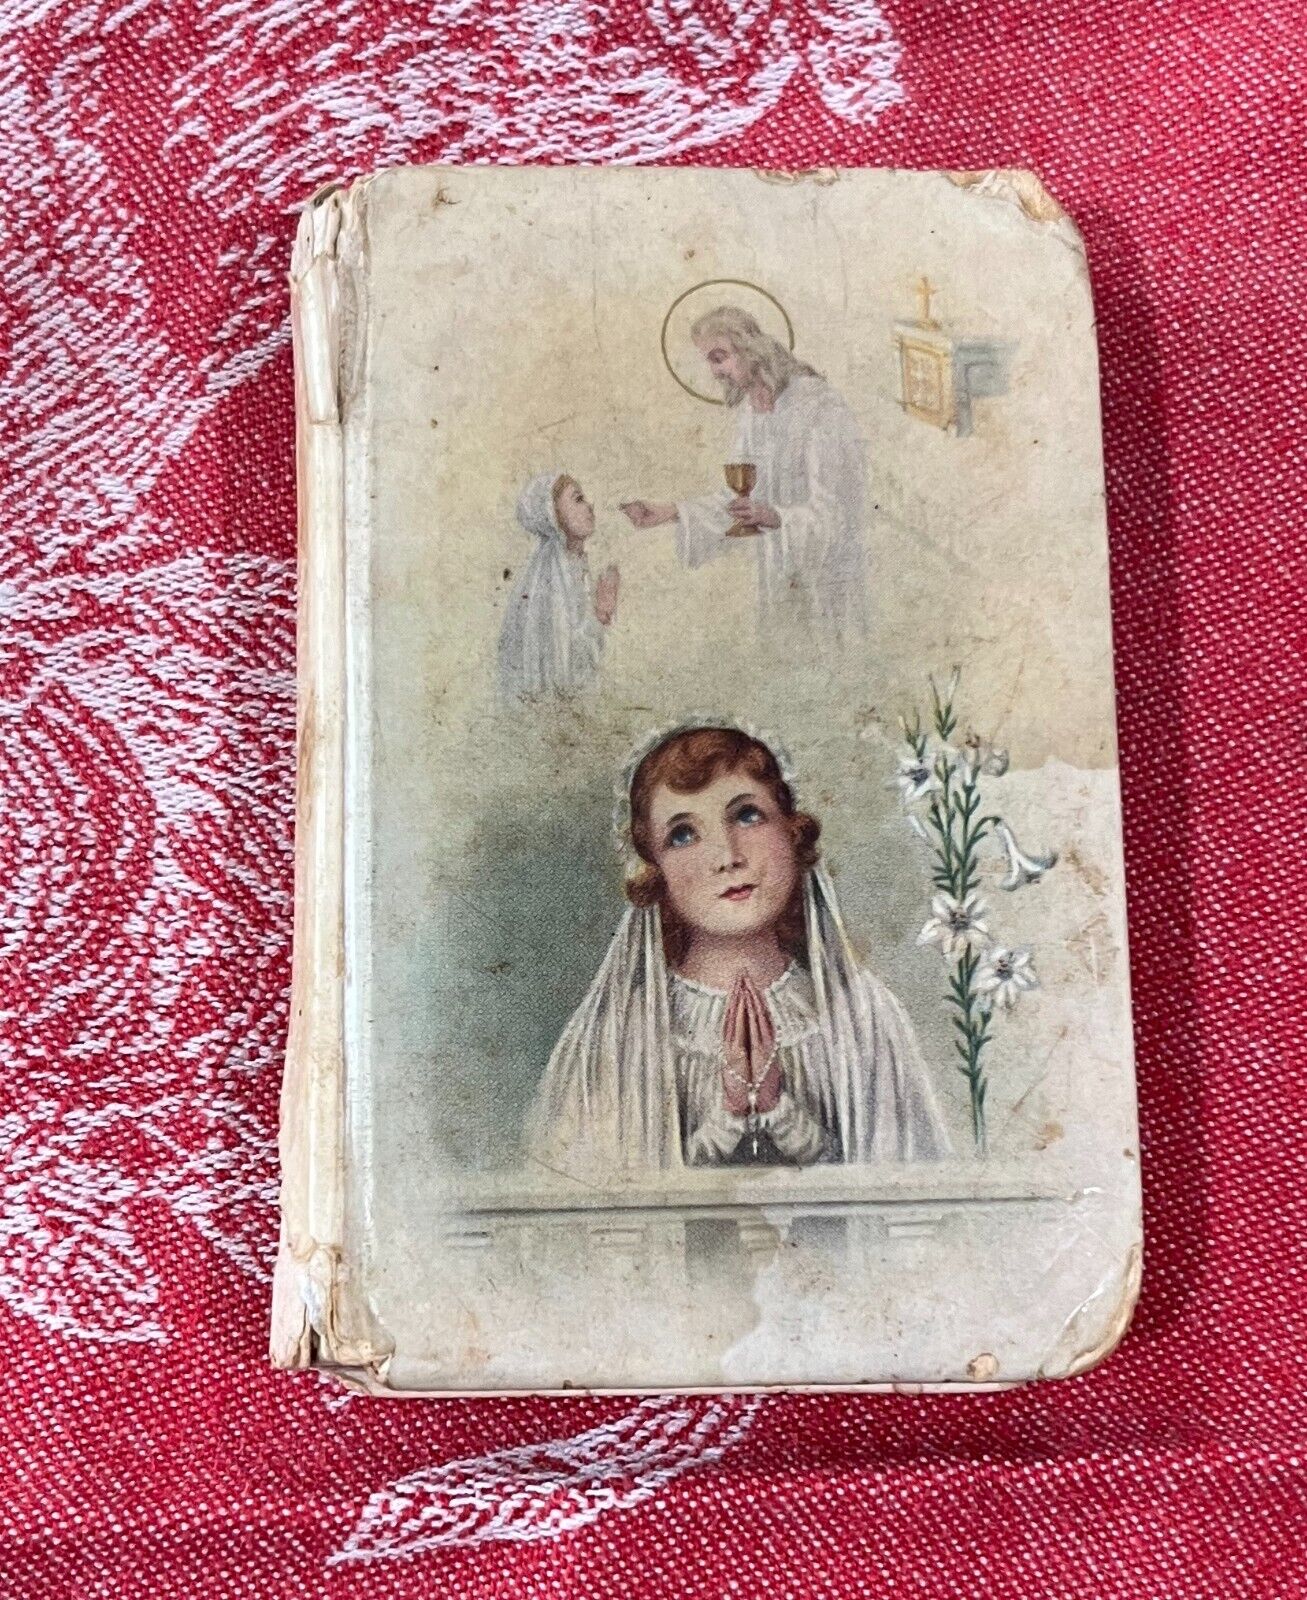 Prayer Book Little Child of God 1942 Rev Daniel A Lord with Crucifix - used 1950